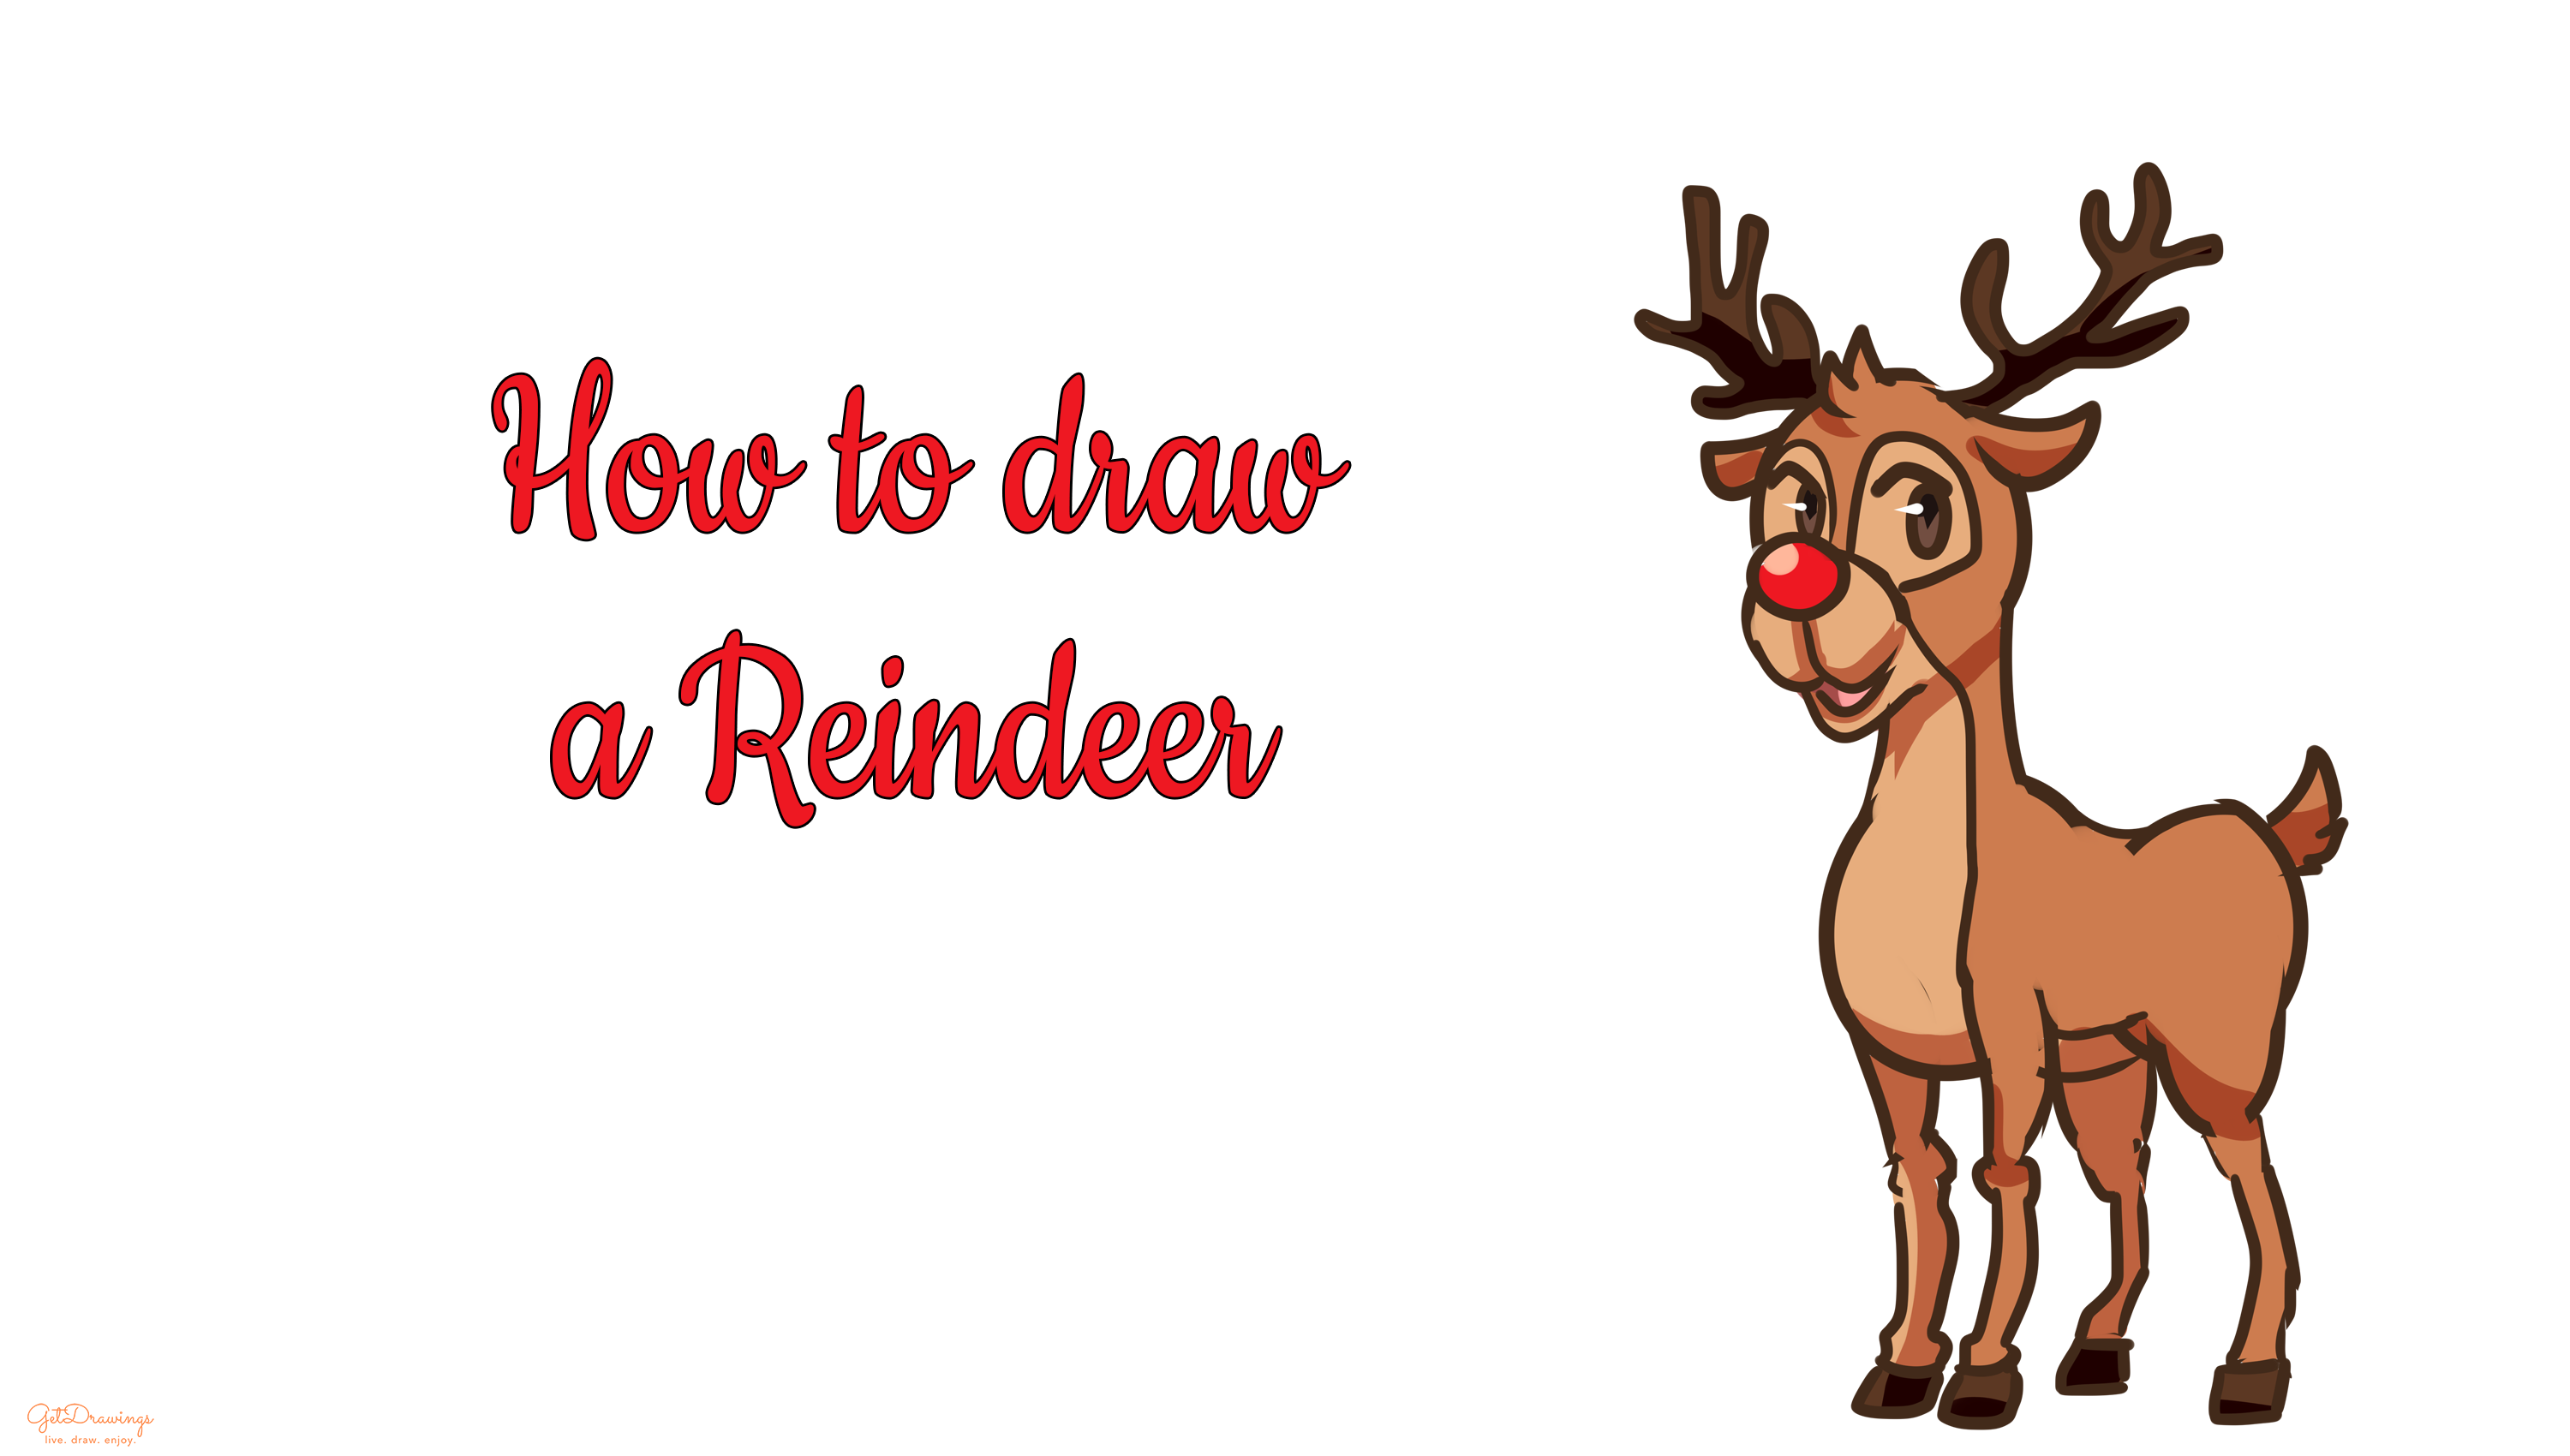 How to Draw a Reindeer